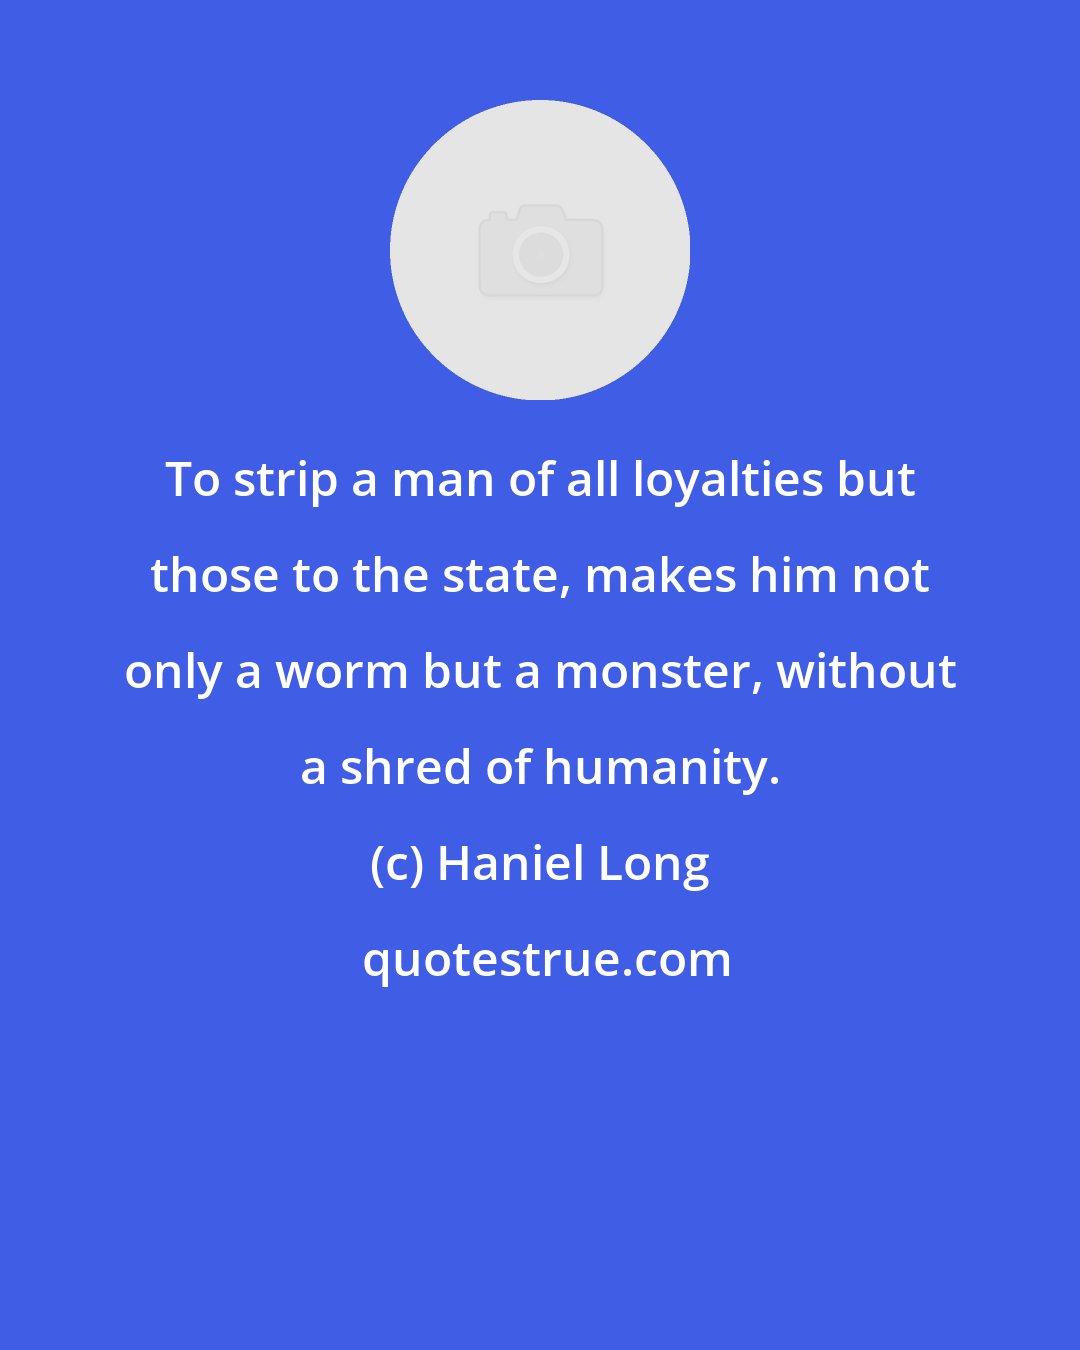 Haniel Long: To strip a man of all loyalties but those to the state, makes him not only a worm but a monster, without a shred of humanity.